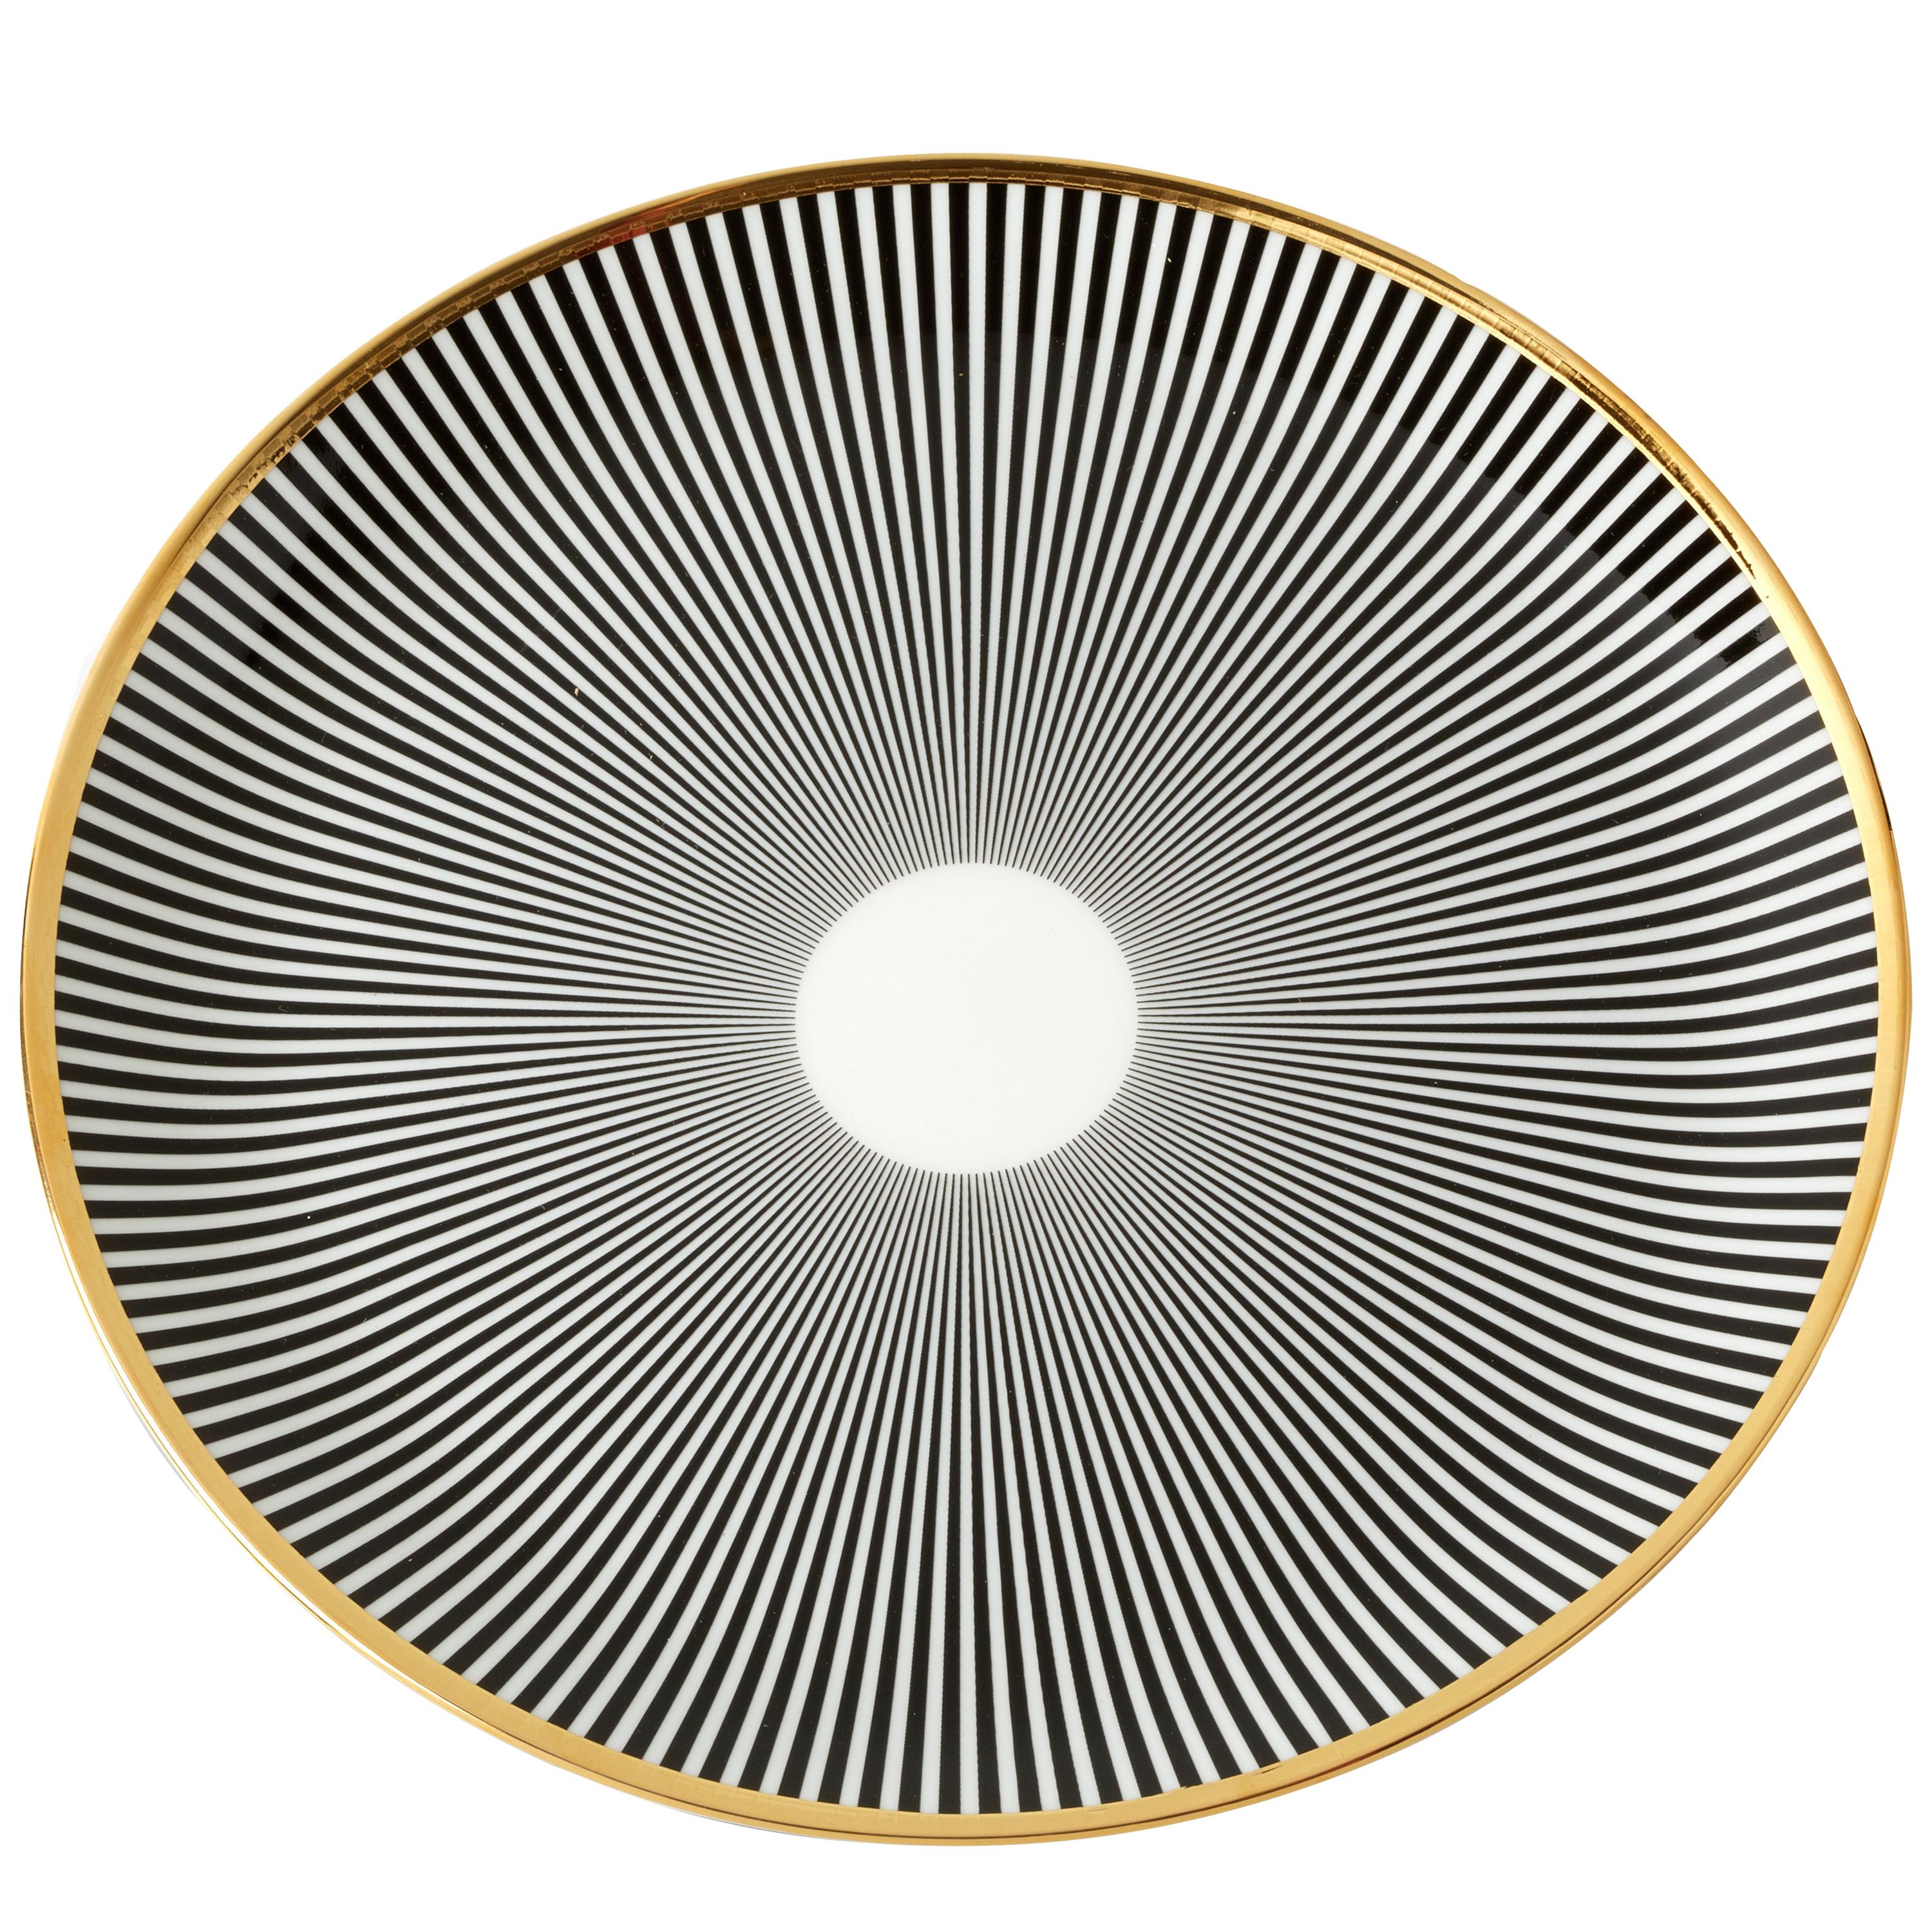 Bone China Dinner Plate with 22-Carat Gold and Black Decals For Sale